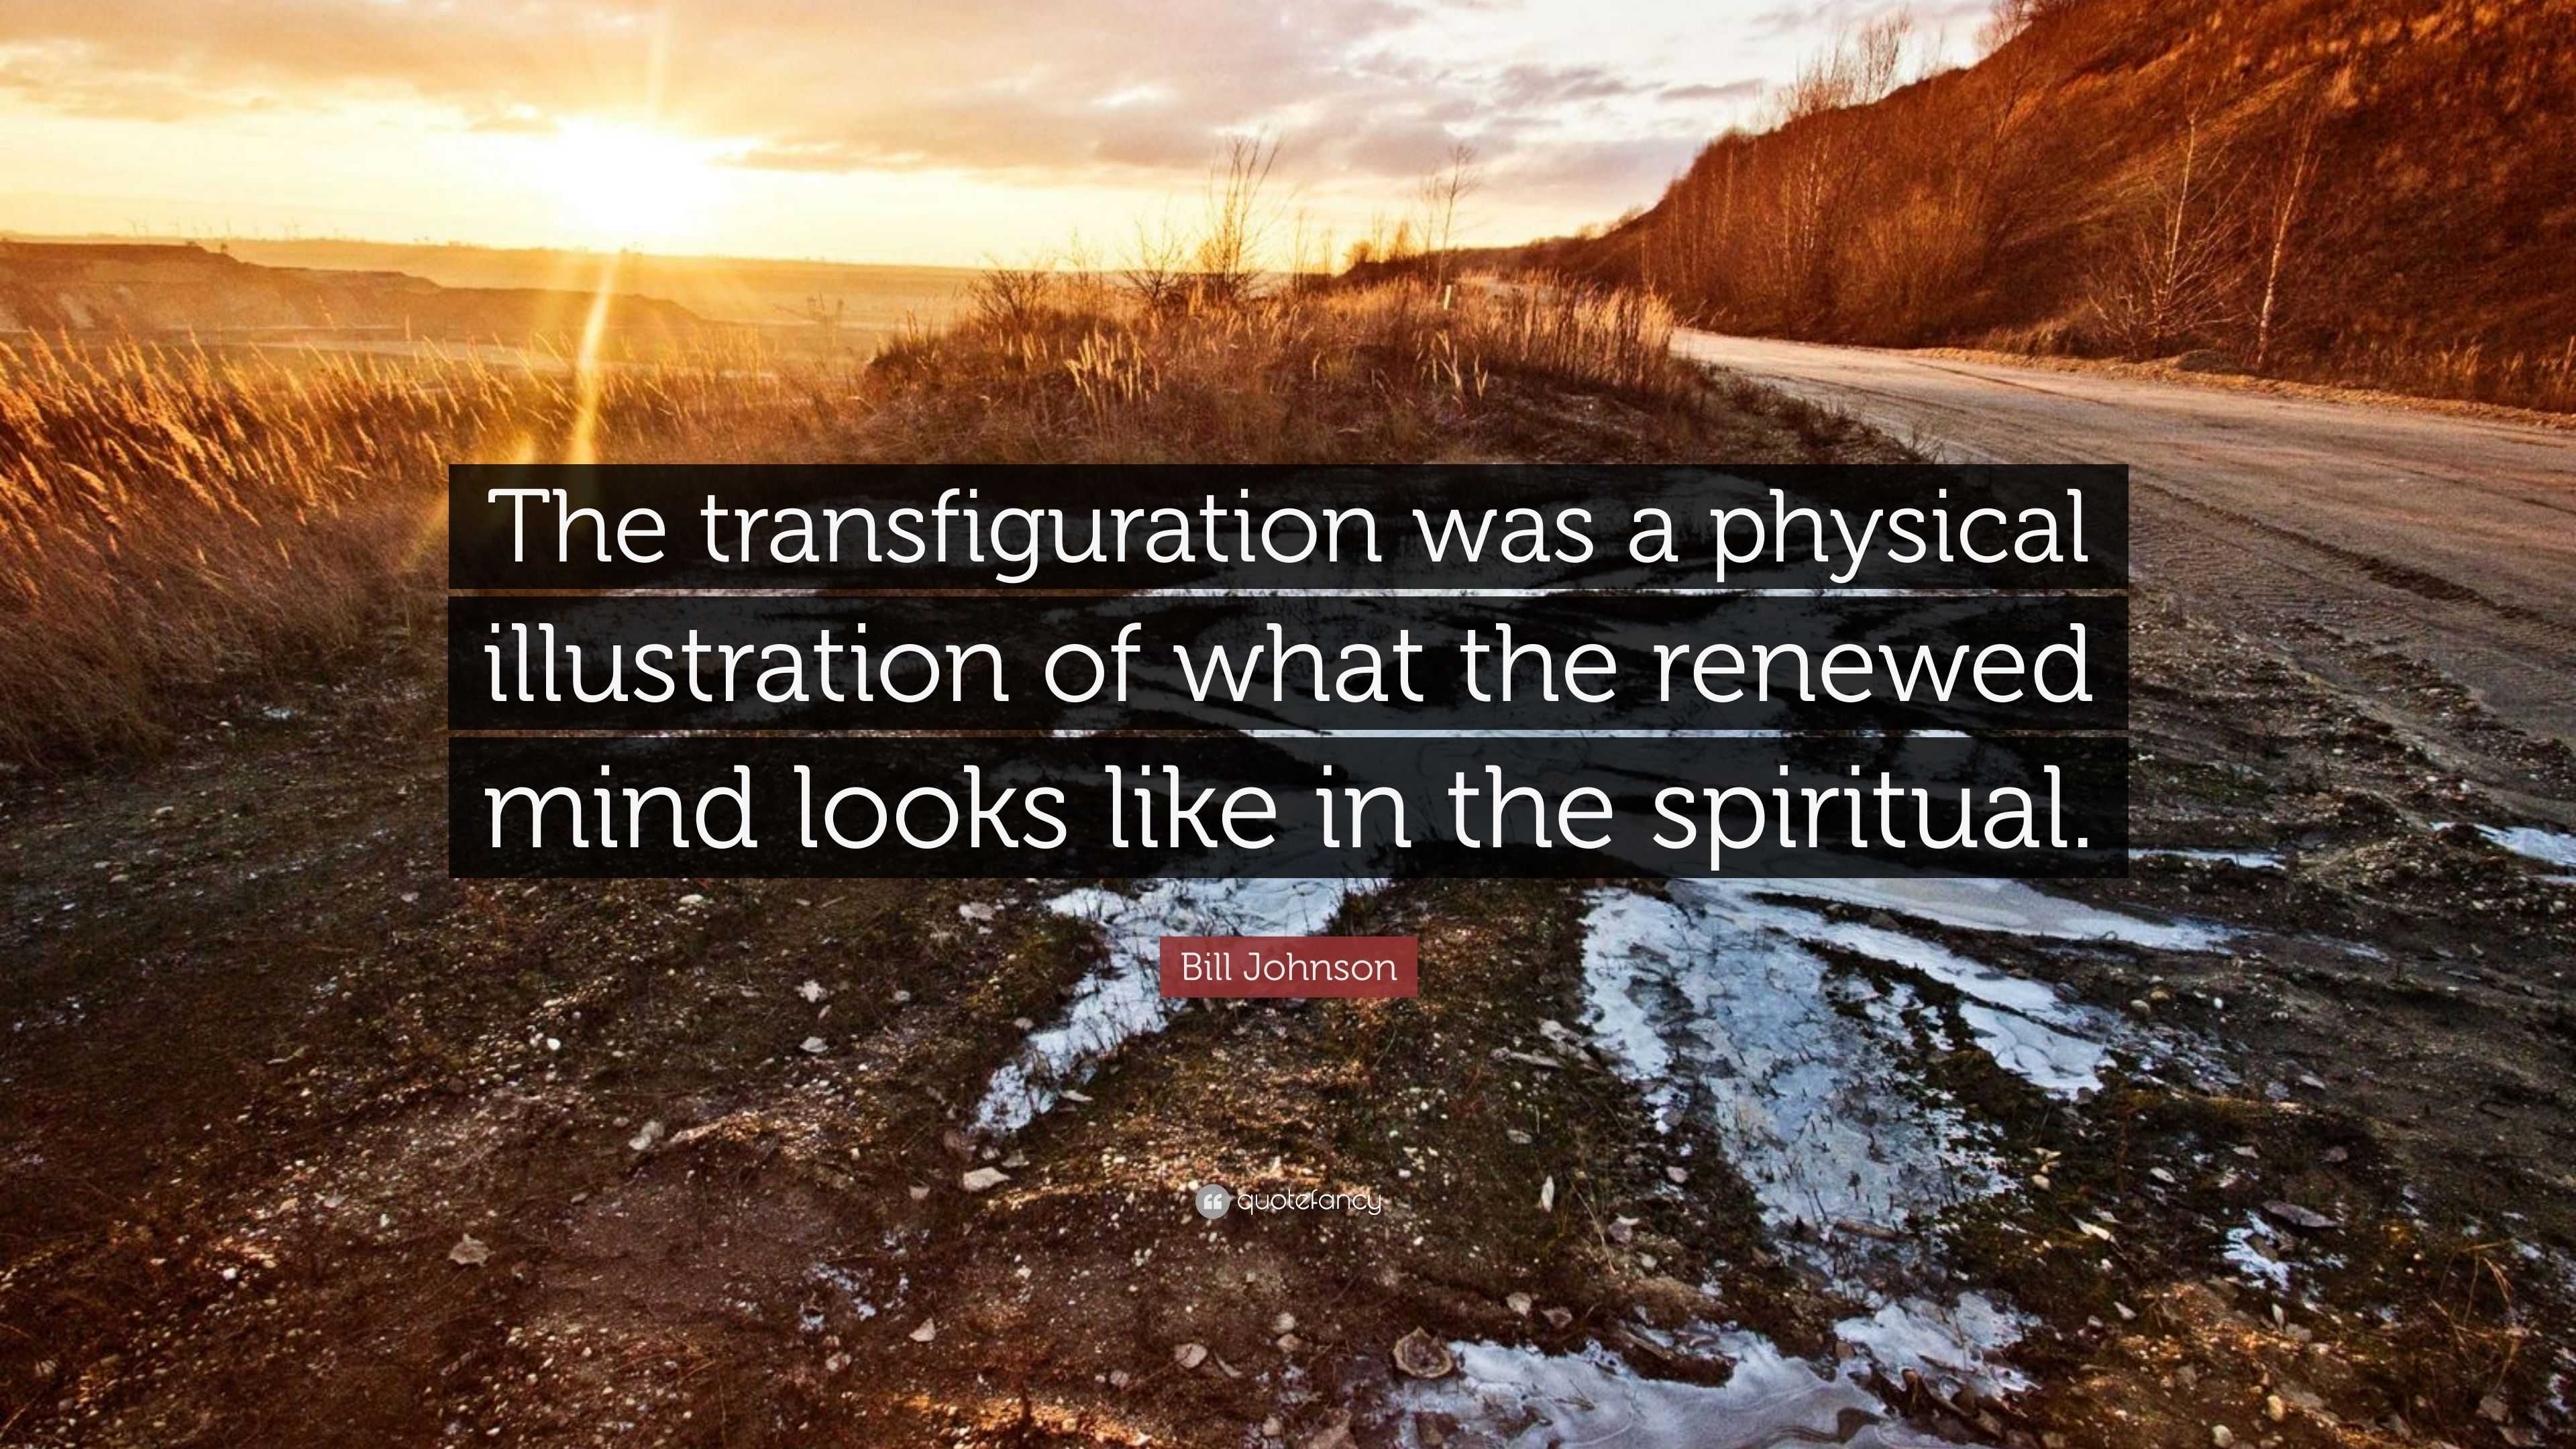 Bill Johnson Quote “The transfiguration was a physical illustration of